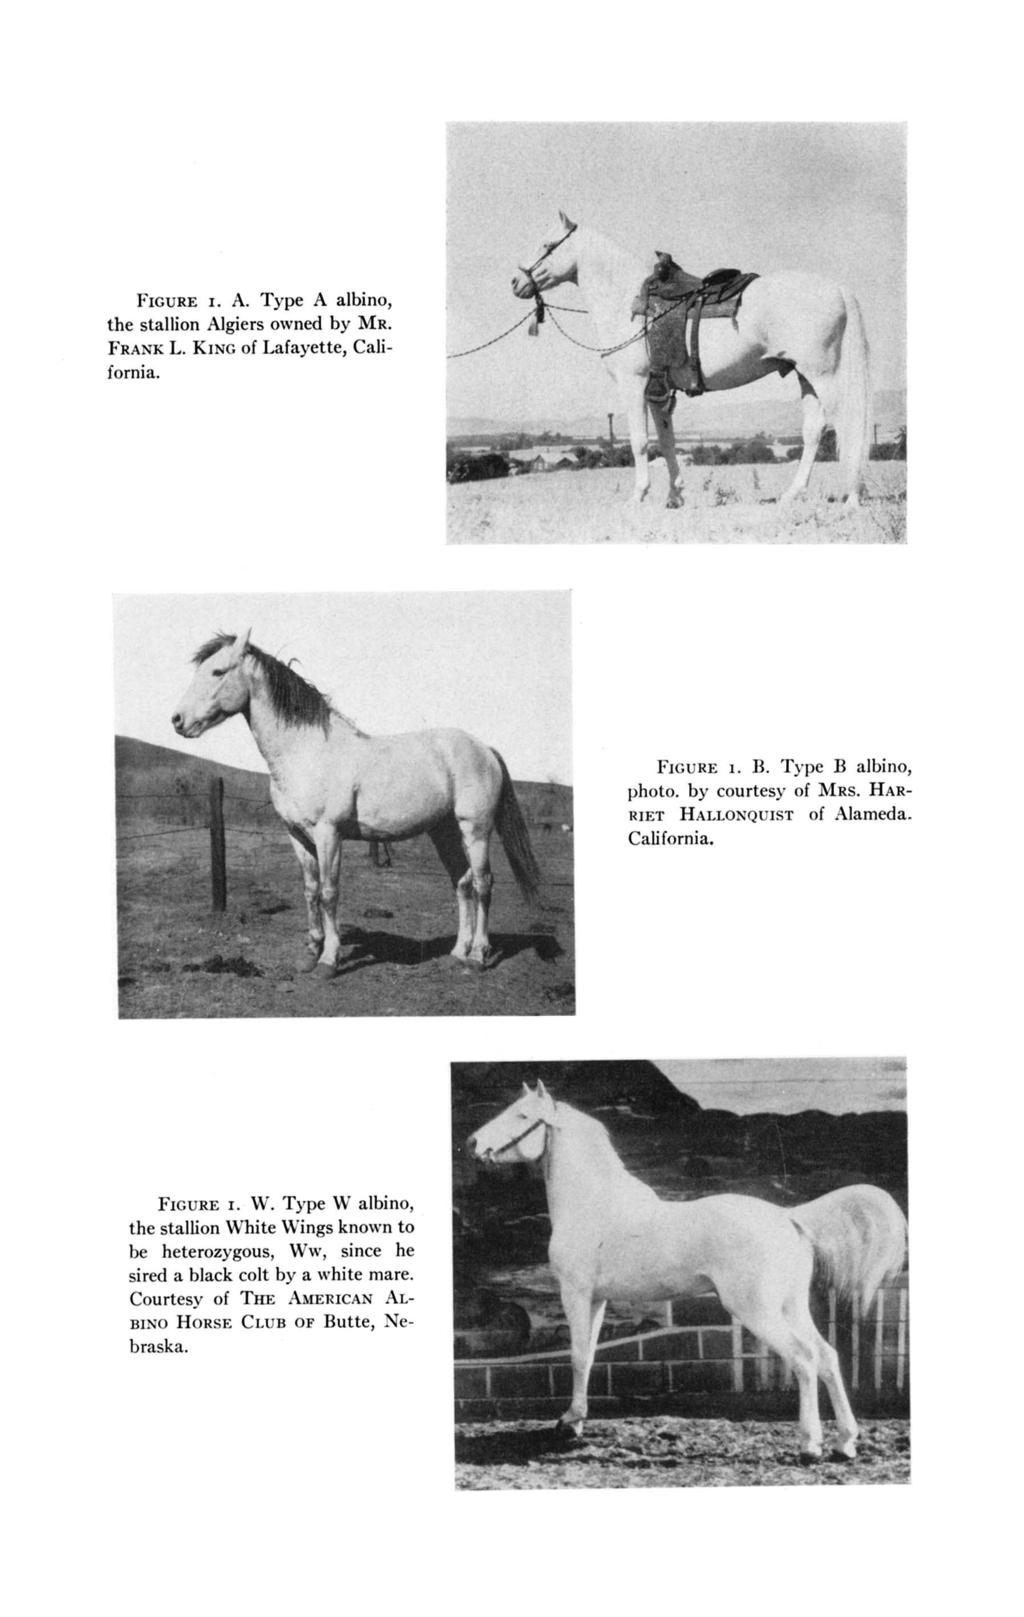 FIGURE I. A. Type A albino, the stallion Algiers owned by MR. FRANK L. KING of Lafayette, California. 1 FIGURE I. B. Type B albino, photo. by courtesy of MRS. HAR- RIET HALLONQUIST of Alameda.